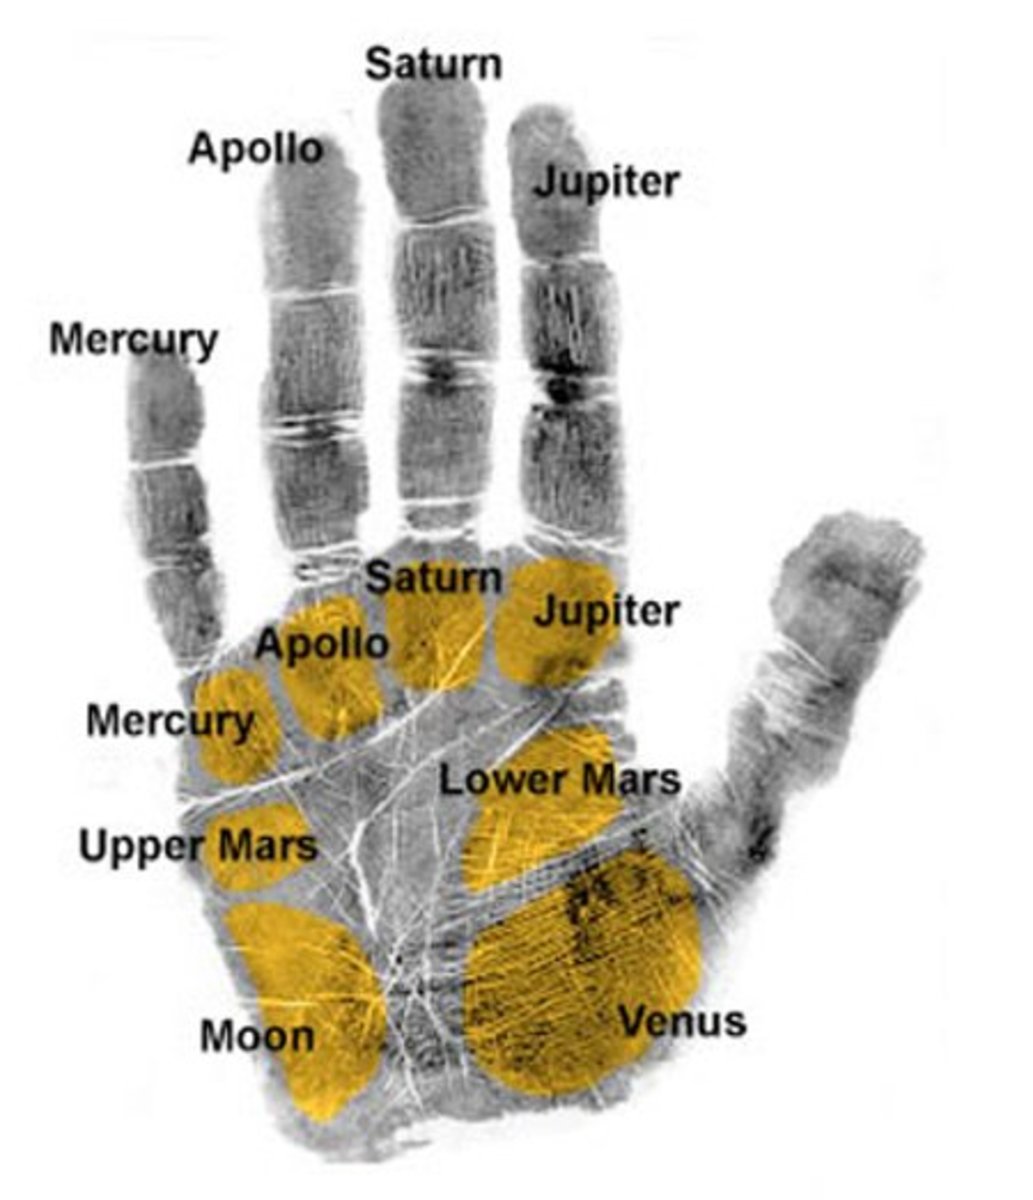 palmistry--an-insight-of-this-art